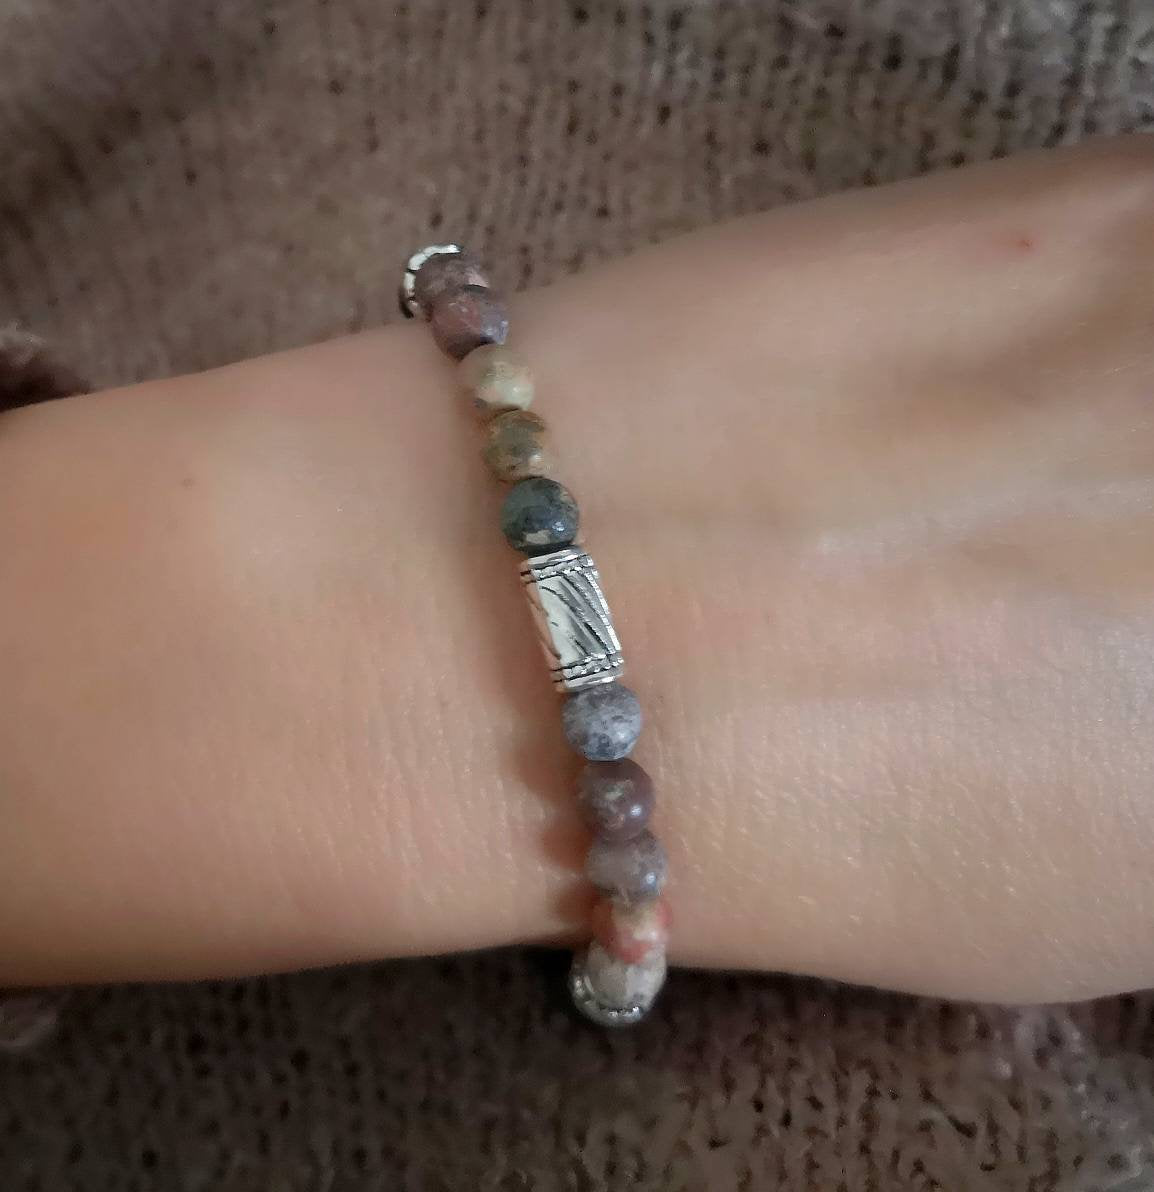 Essential Oil Diffuser Bracelet - With Love Jewellery UK